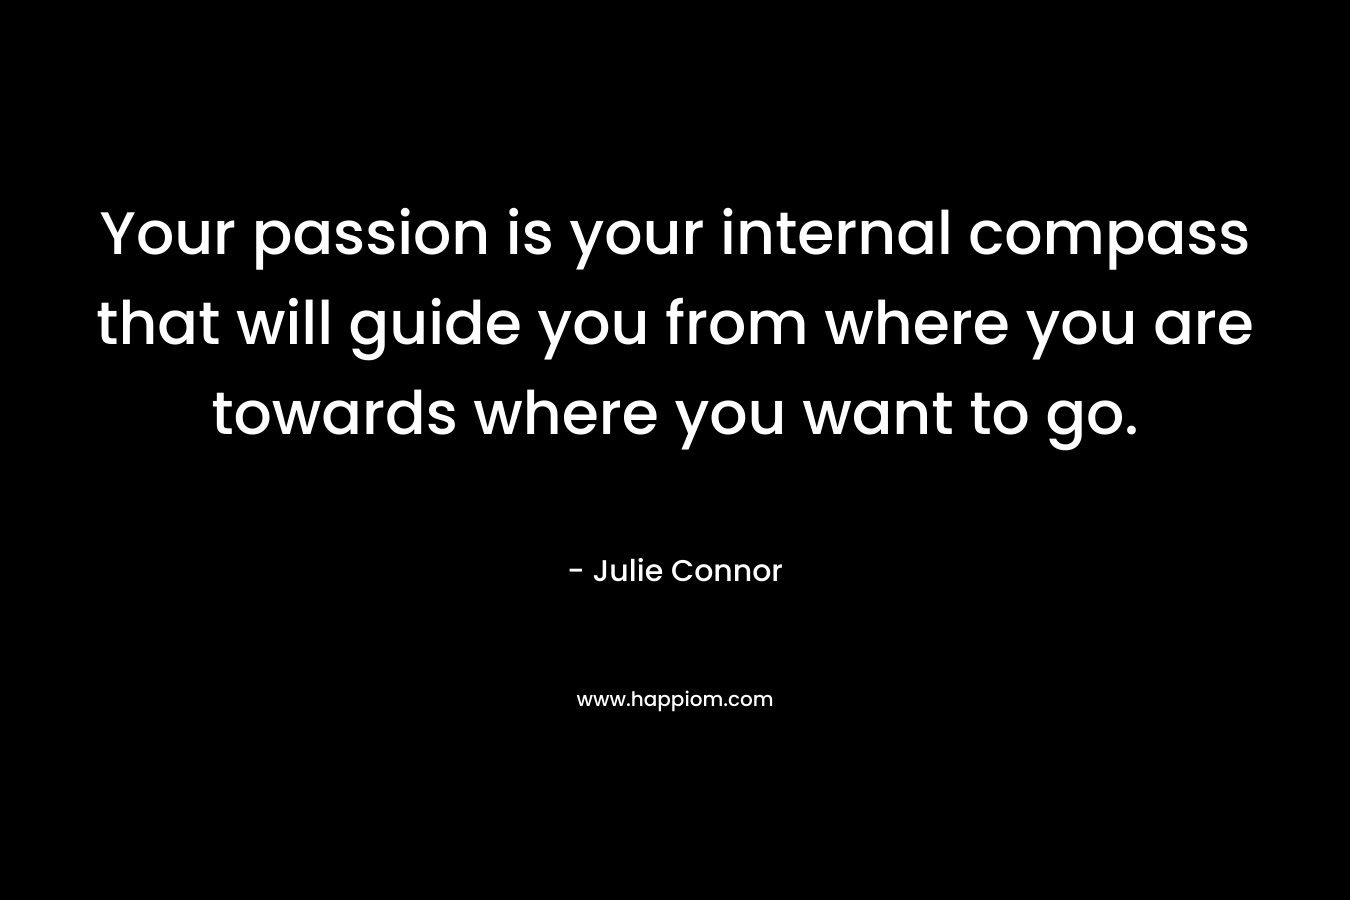 Your passion is your internal compass that will guide you from where you are towards where you want to go.